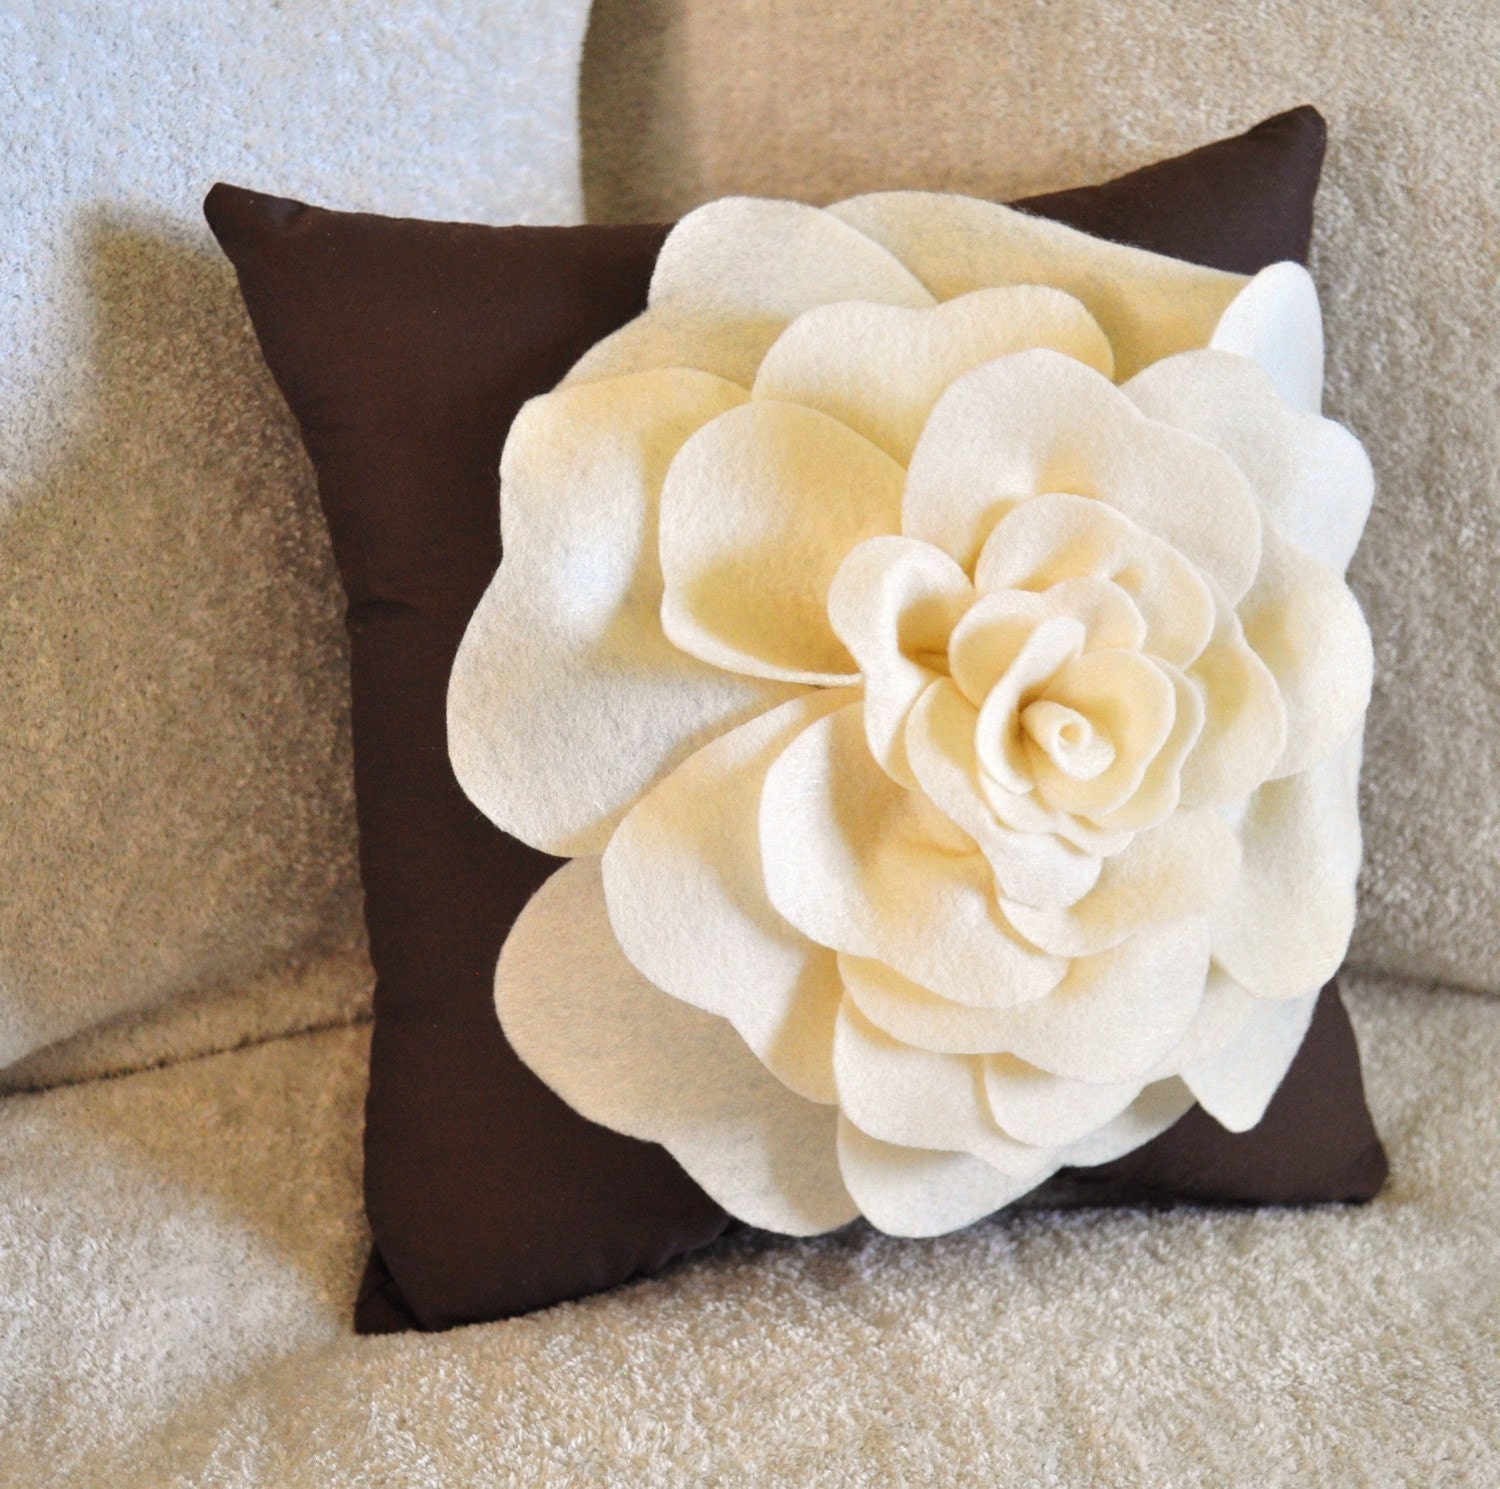 Antique White Rose on Brown Pillow